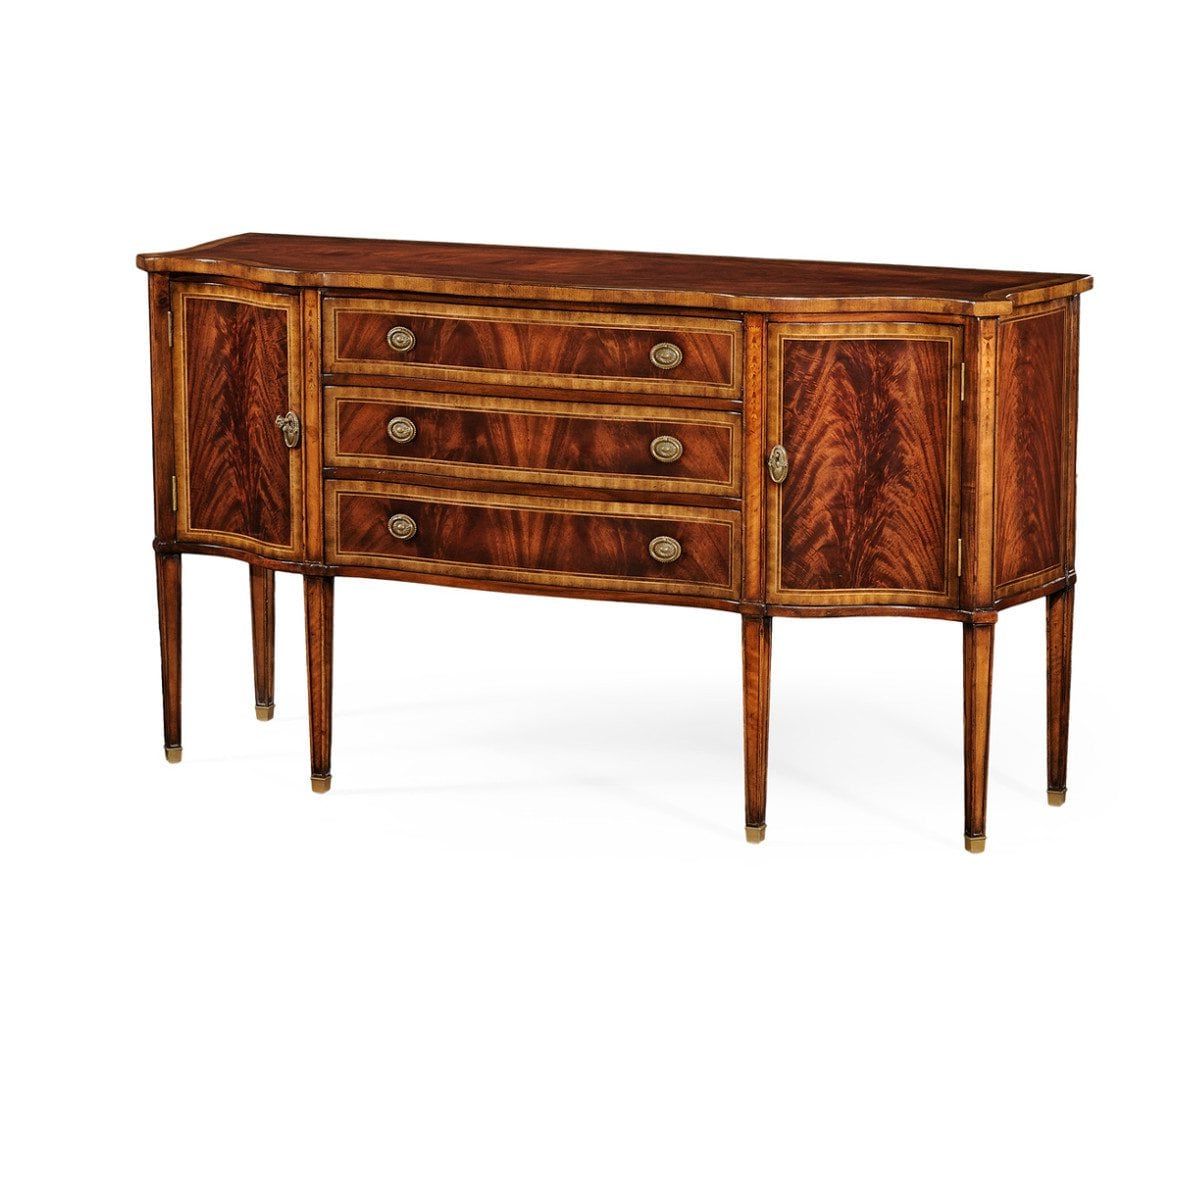 Famous Brown Wood 72 Inch Sideboards Within High Quality Sideboards And Buffets Made Of Mahogany, Walnut And More (View 12 of 20)